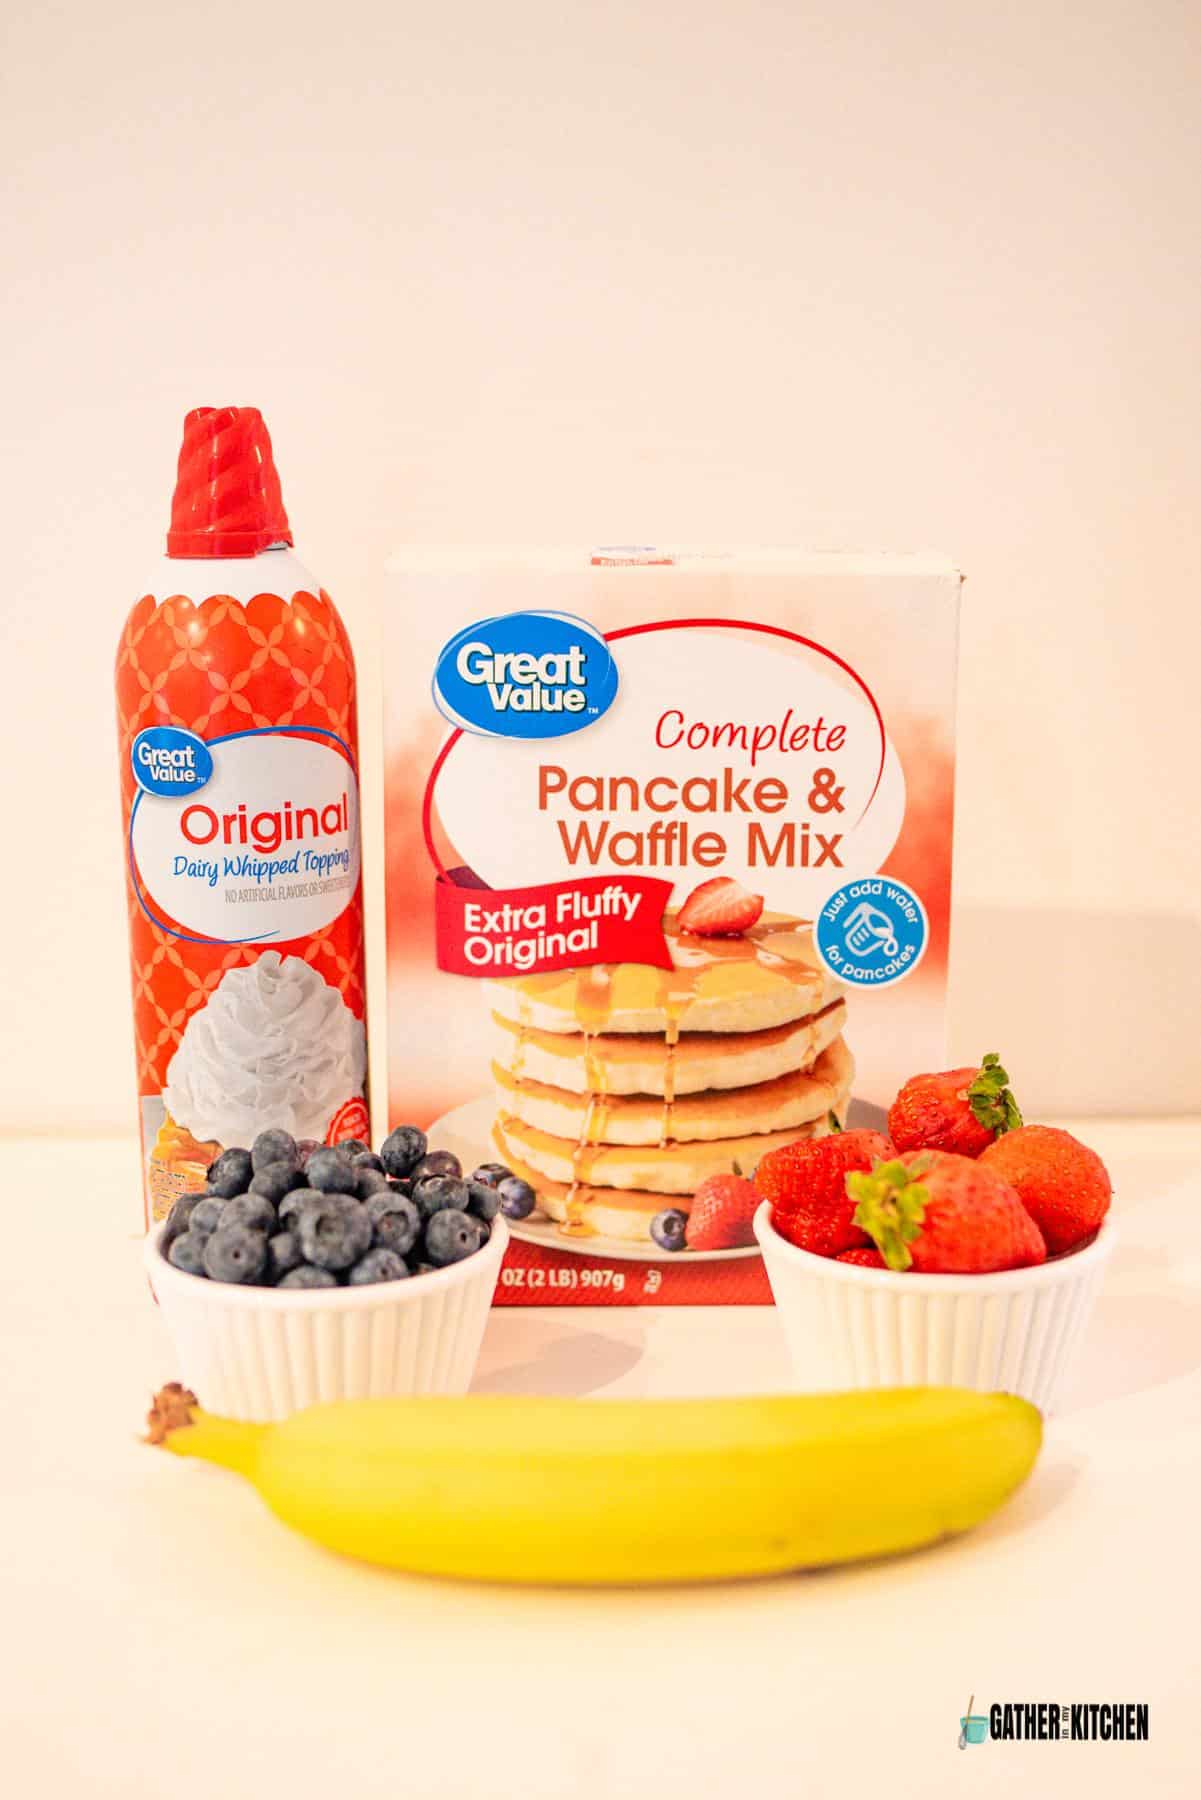 Ingredients for bunny face pancakes: whipped topping, pancake mix, blueberries, strawberries and banana.